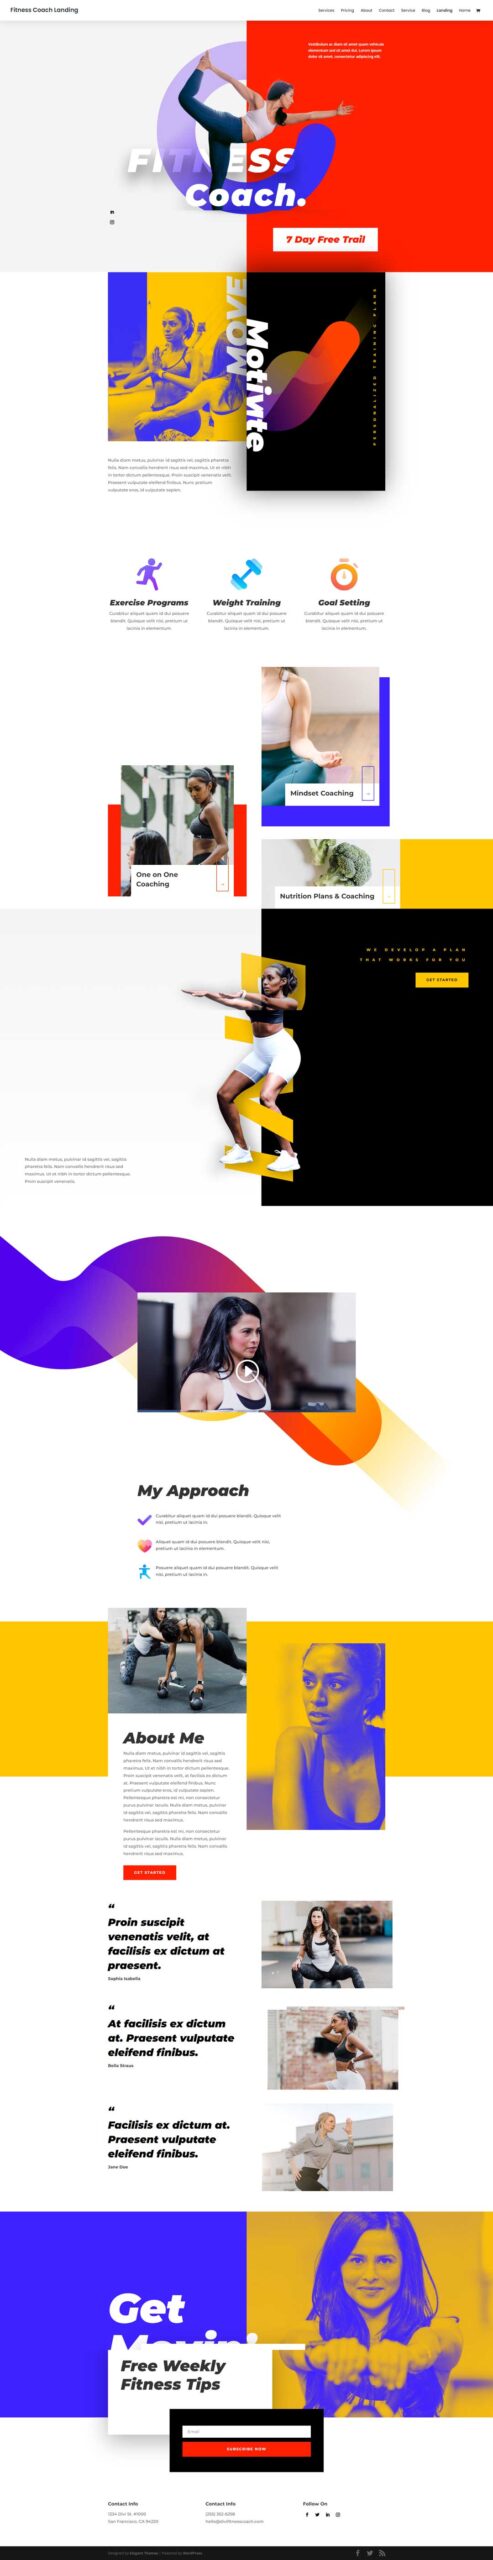 fitness coach landing page demo